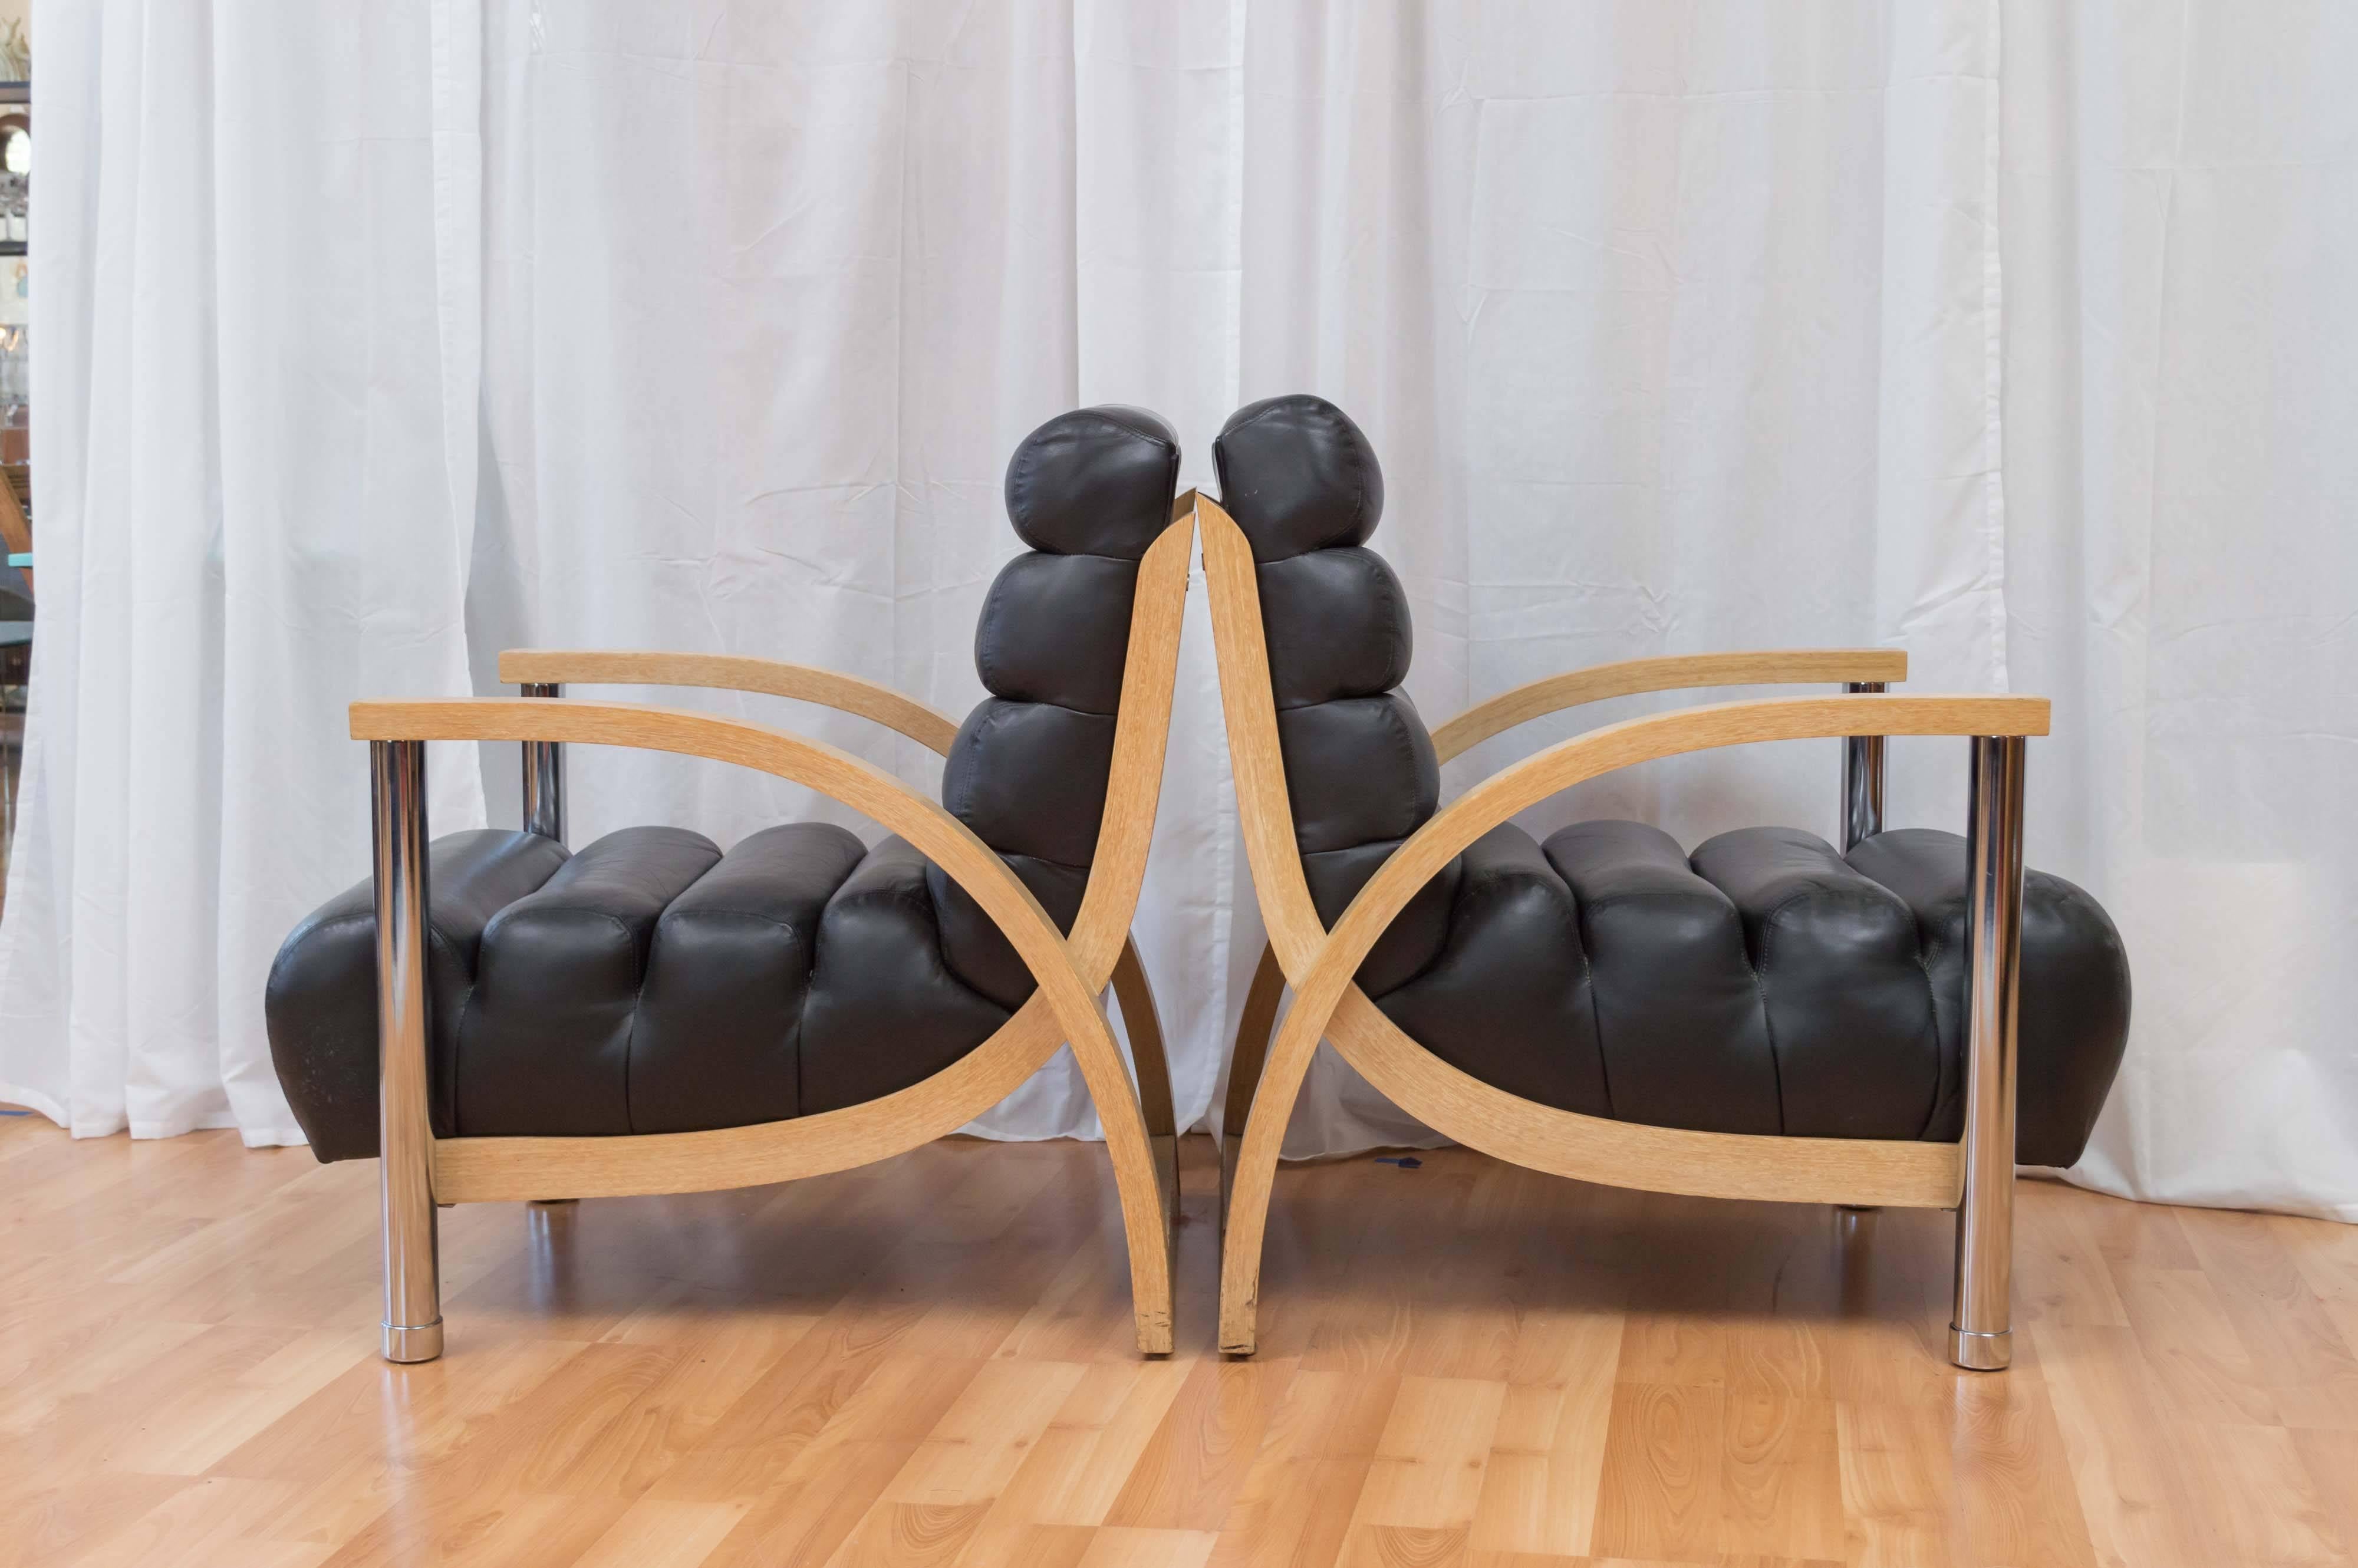 A pair of oversized Art Deco-meets-Memphis-style oak, leather, and chrome “Eclipse” club chairs by New York-based designer Jay Spectre for Century.

Thick bentwood frame features cerused oak veneer with semi-opaque cream varnish wash, and